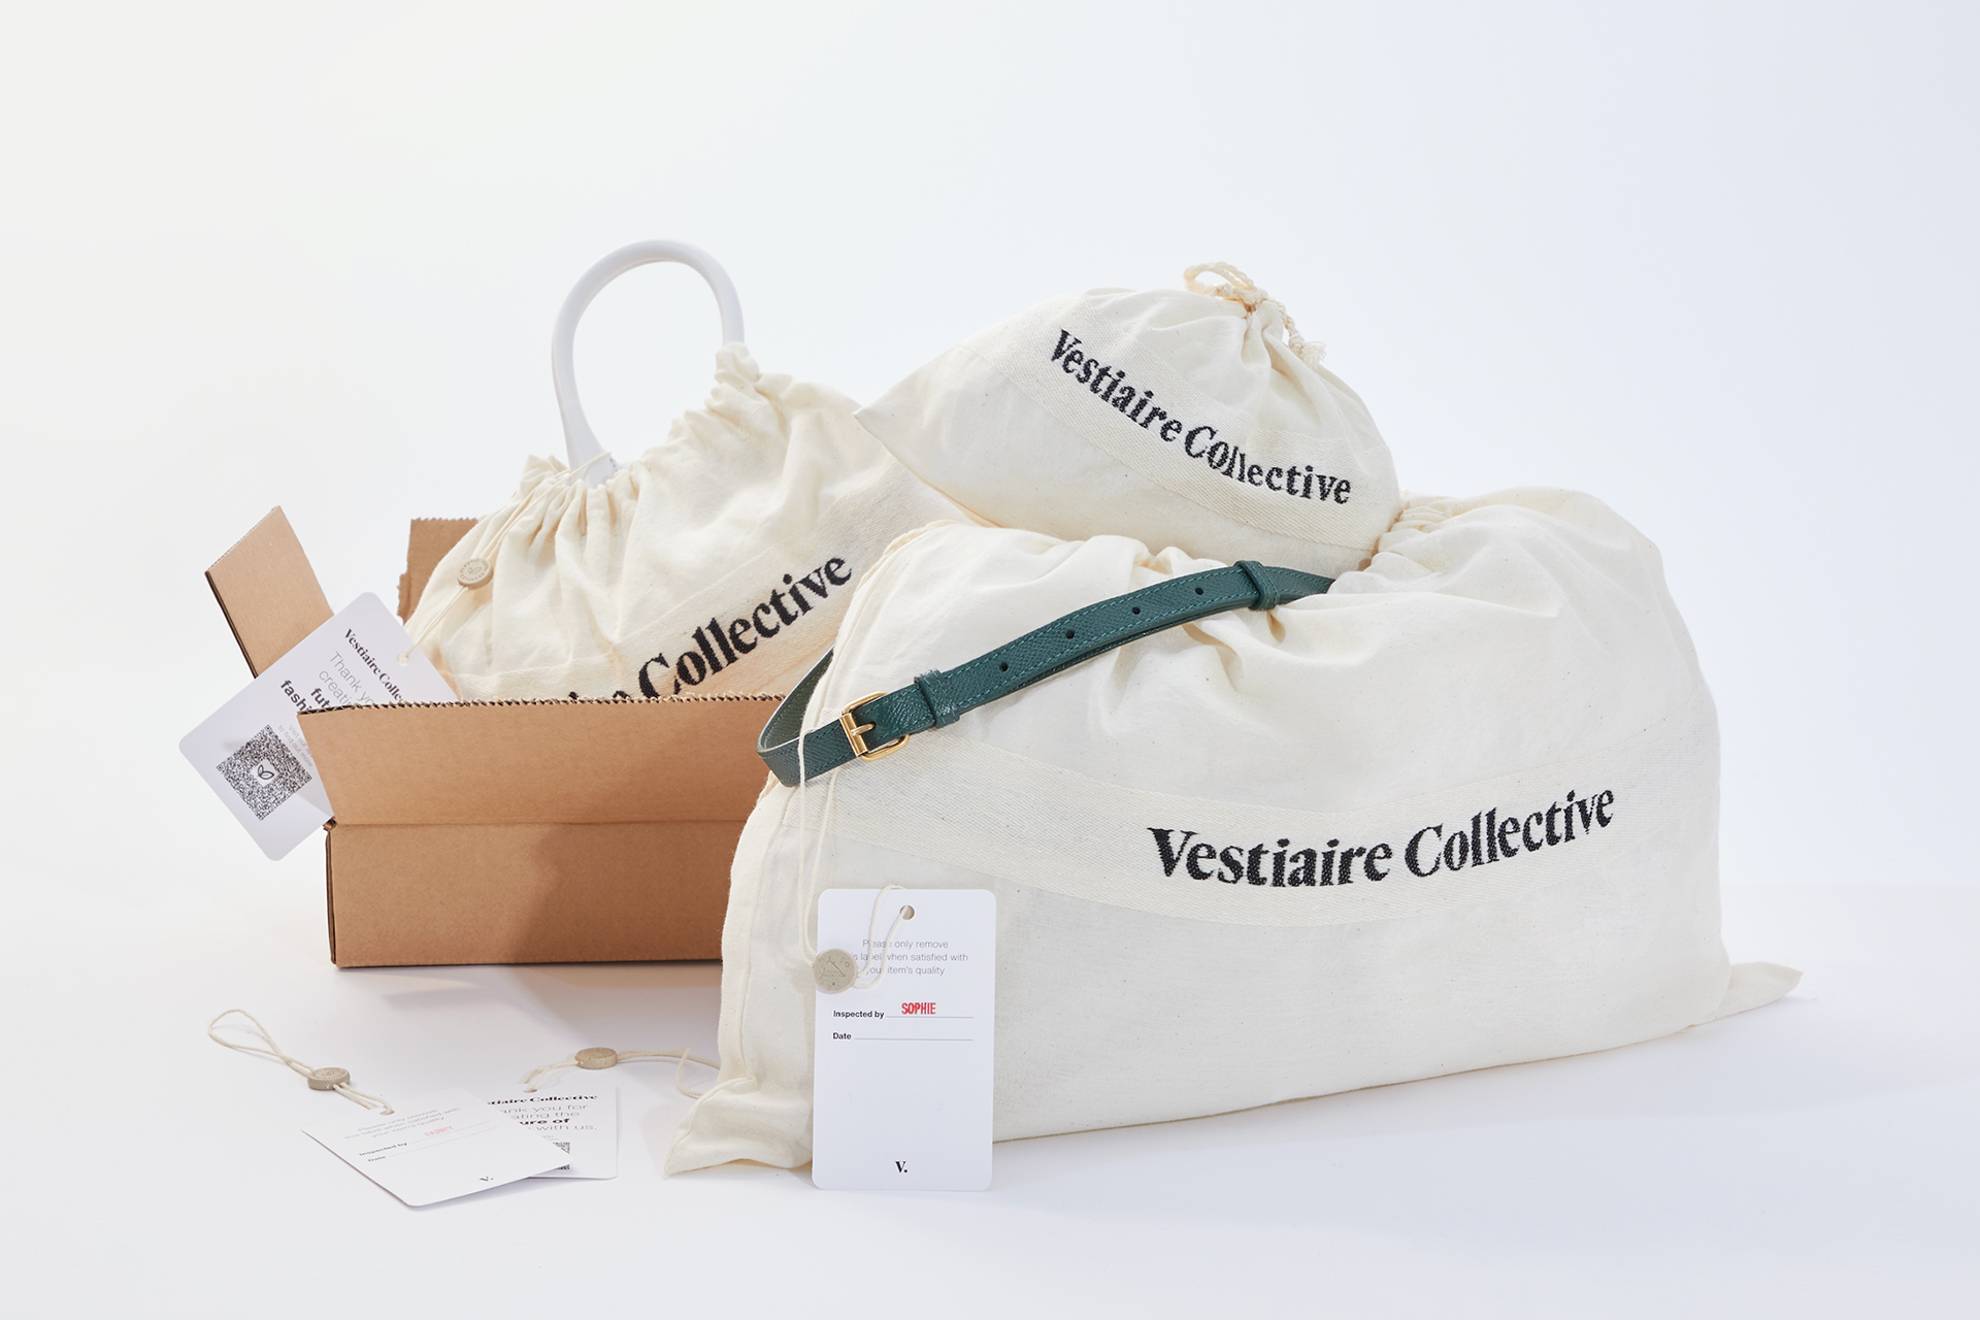 My experience with Vestiaire Collective quality control - buying a